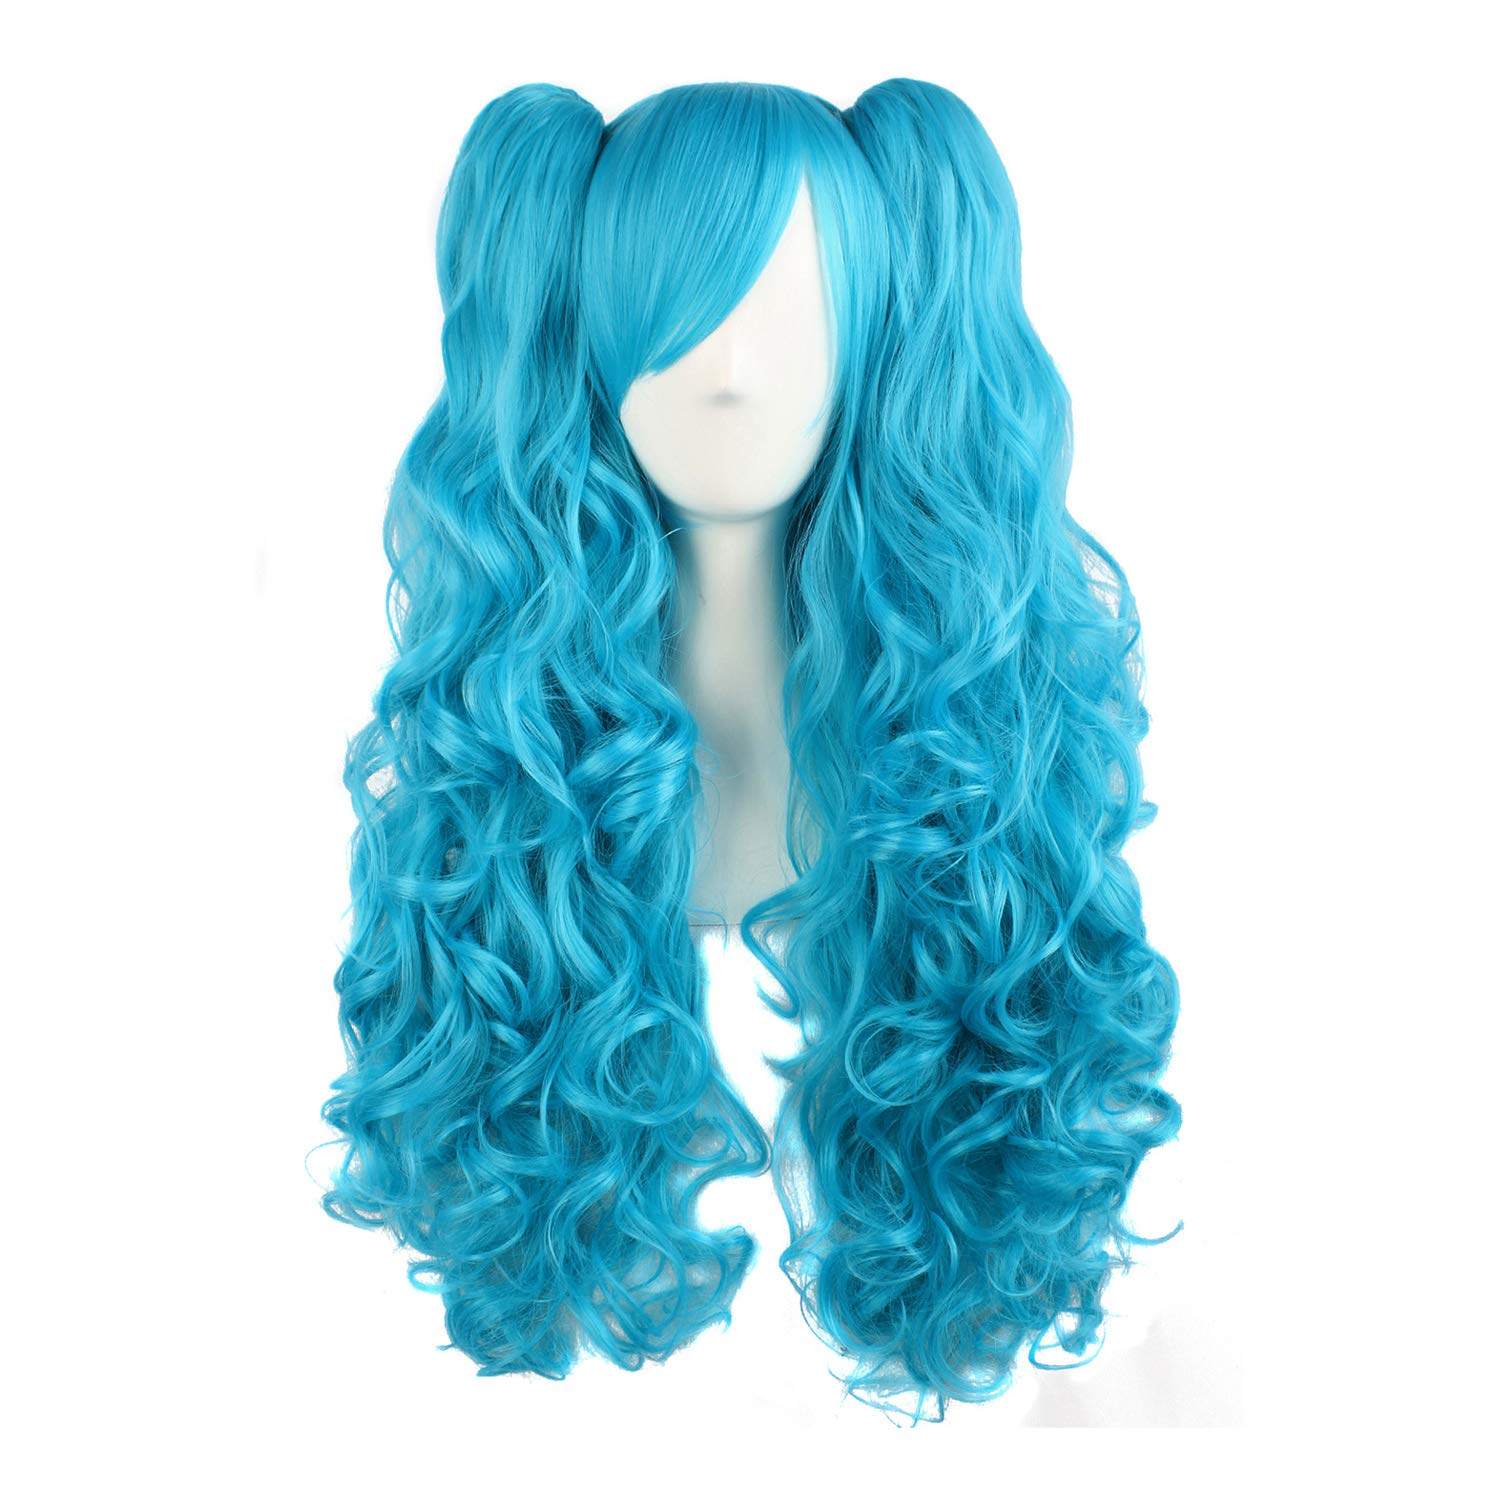 Price:$22.99    MapofBeauty 28"/70cm Lolita Long Curly Clip on Ponytails Cosplay Wig (Azure Blue)  Beauty